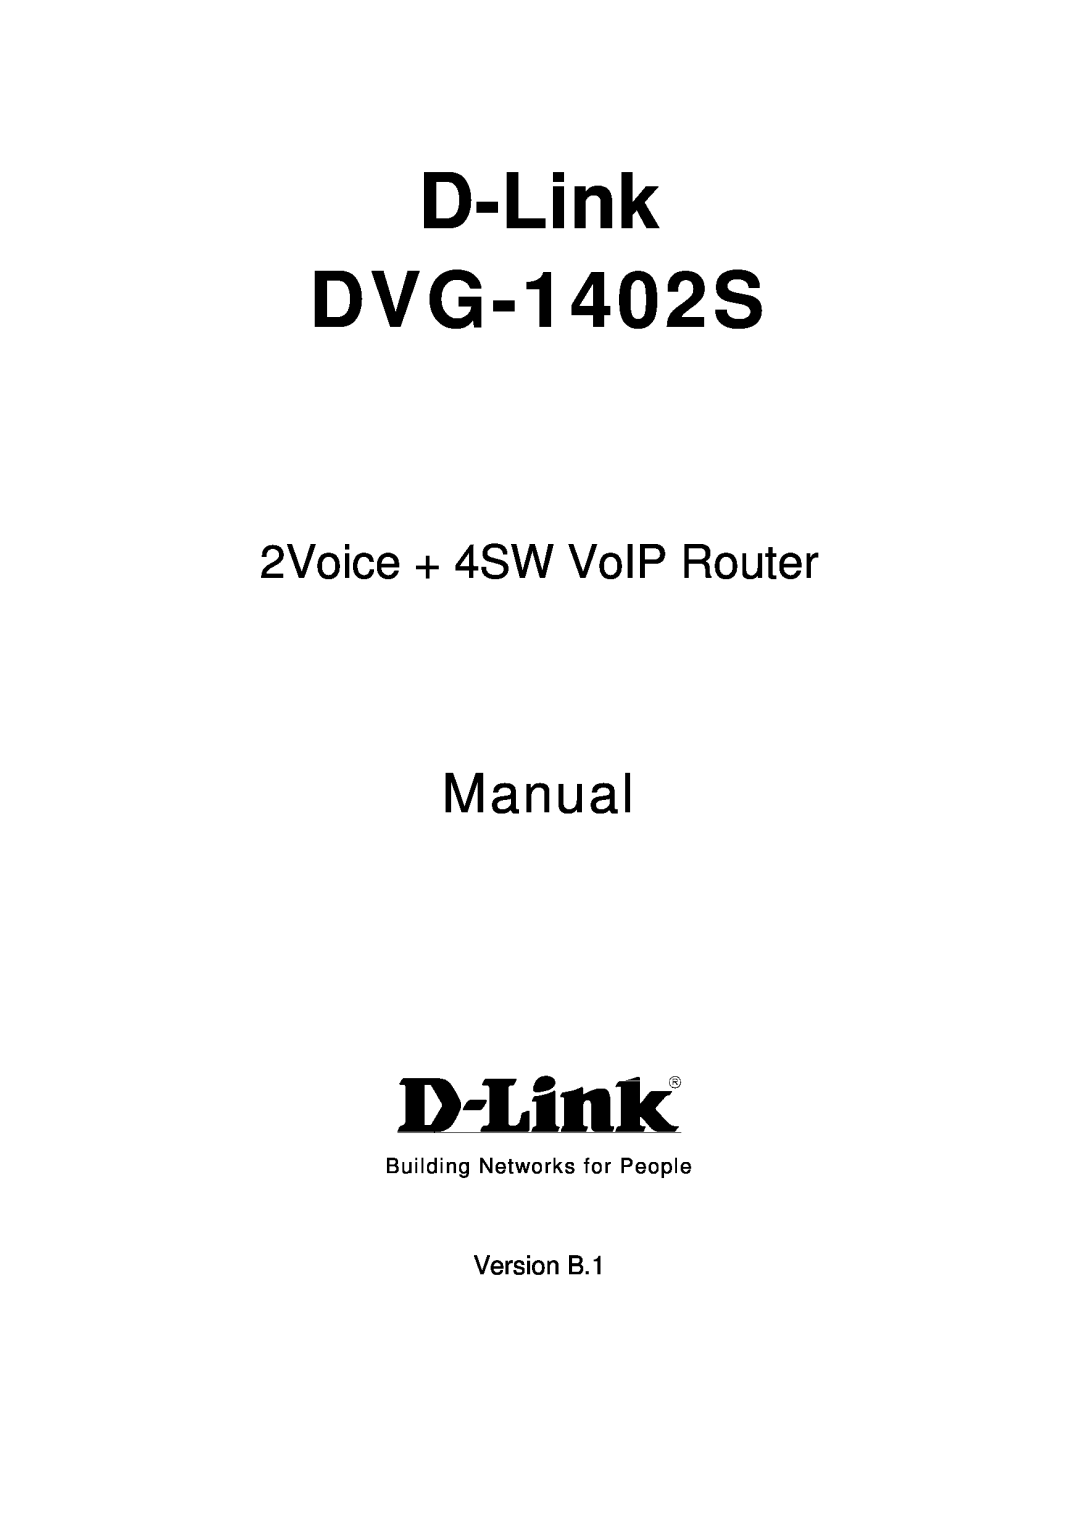 D-Link manual D-Link DVG-1402S, Manual, 2Voice + 4SW VoIP Router, Building Networks for People 